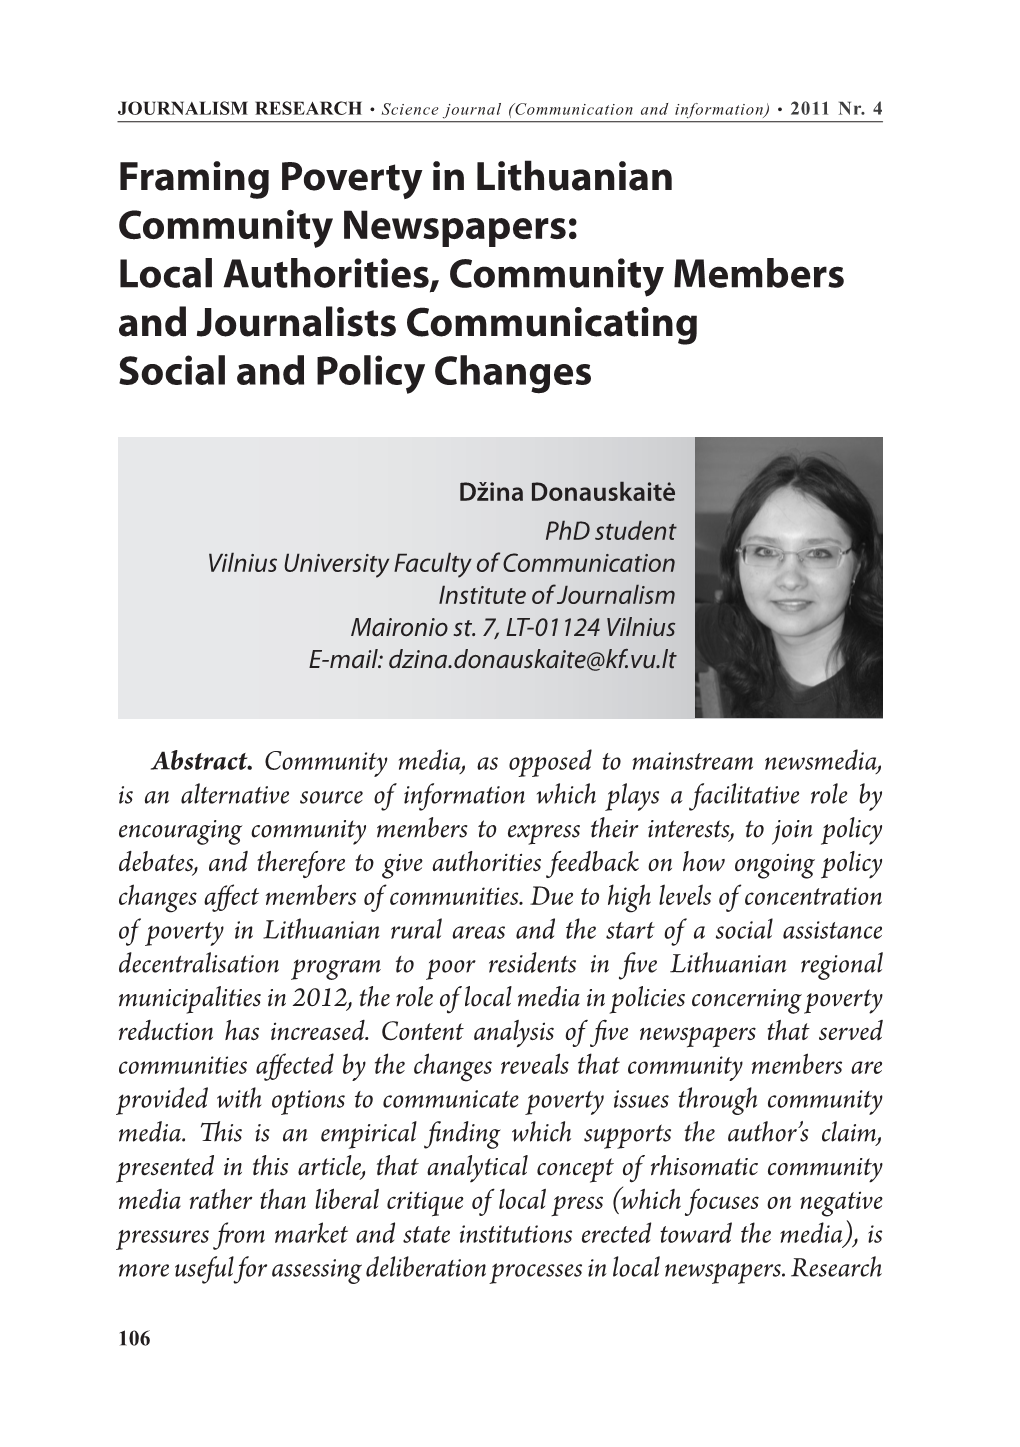 Framing Poverty in Lithuanian Community Newspapers: Local Authorities, Community Members and Journalists Communicating Social and Policy Changes